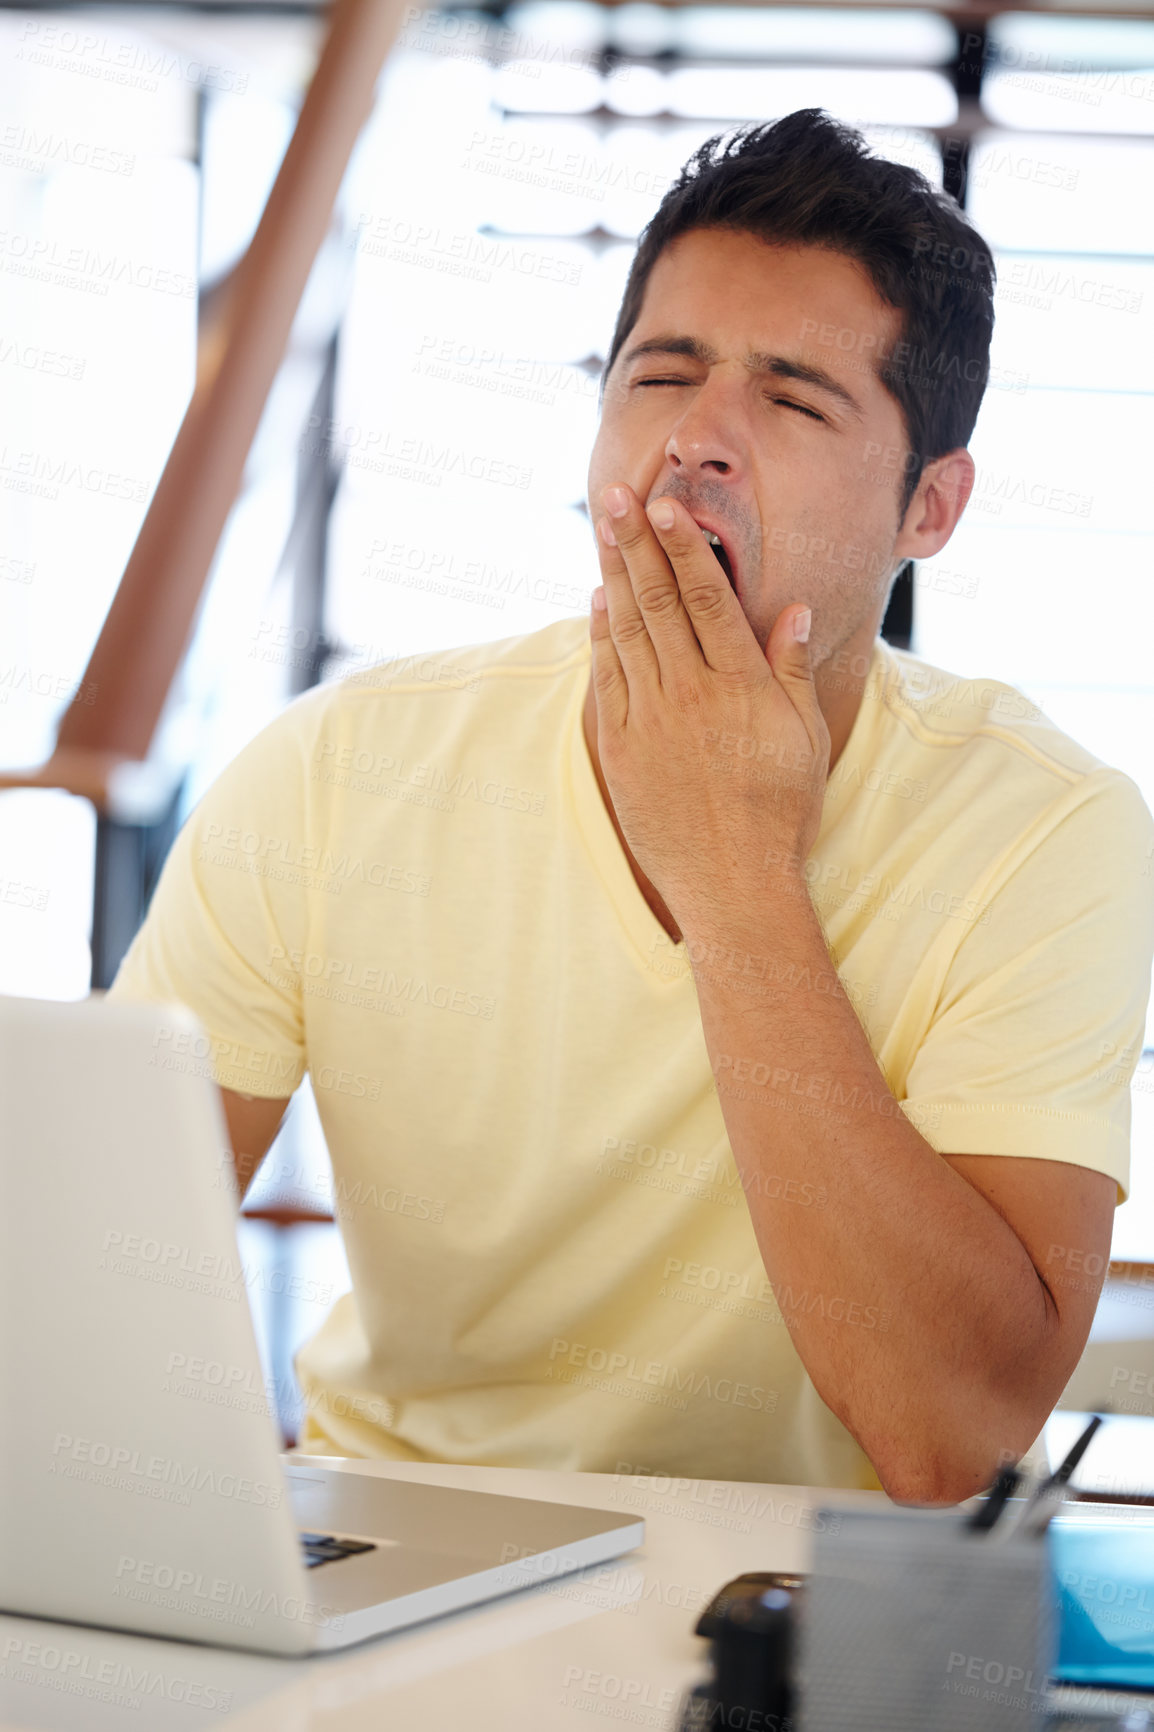 Buy stock photo A young man yawning while sitting at a desk in front of a computer